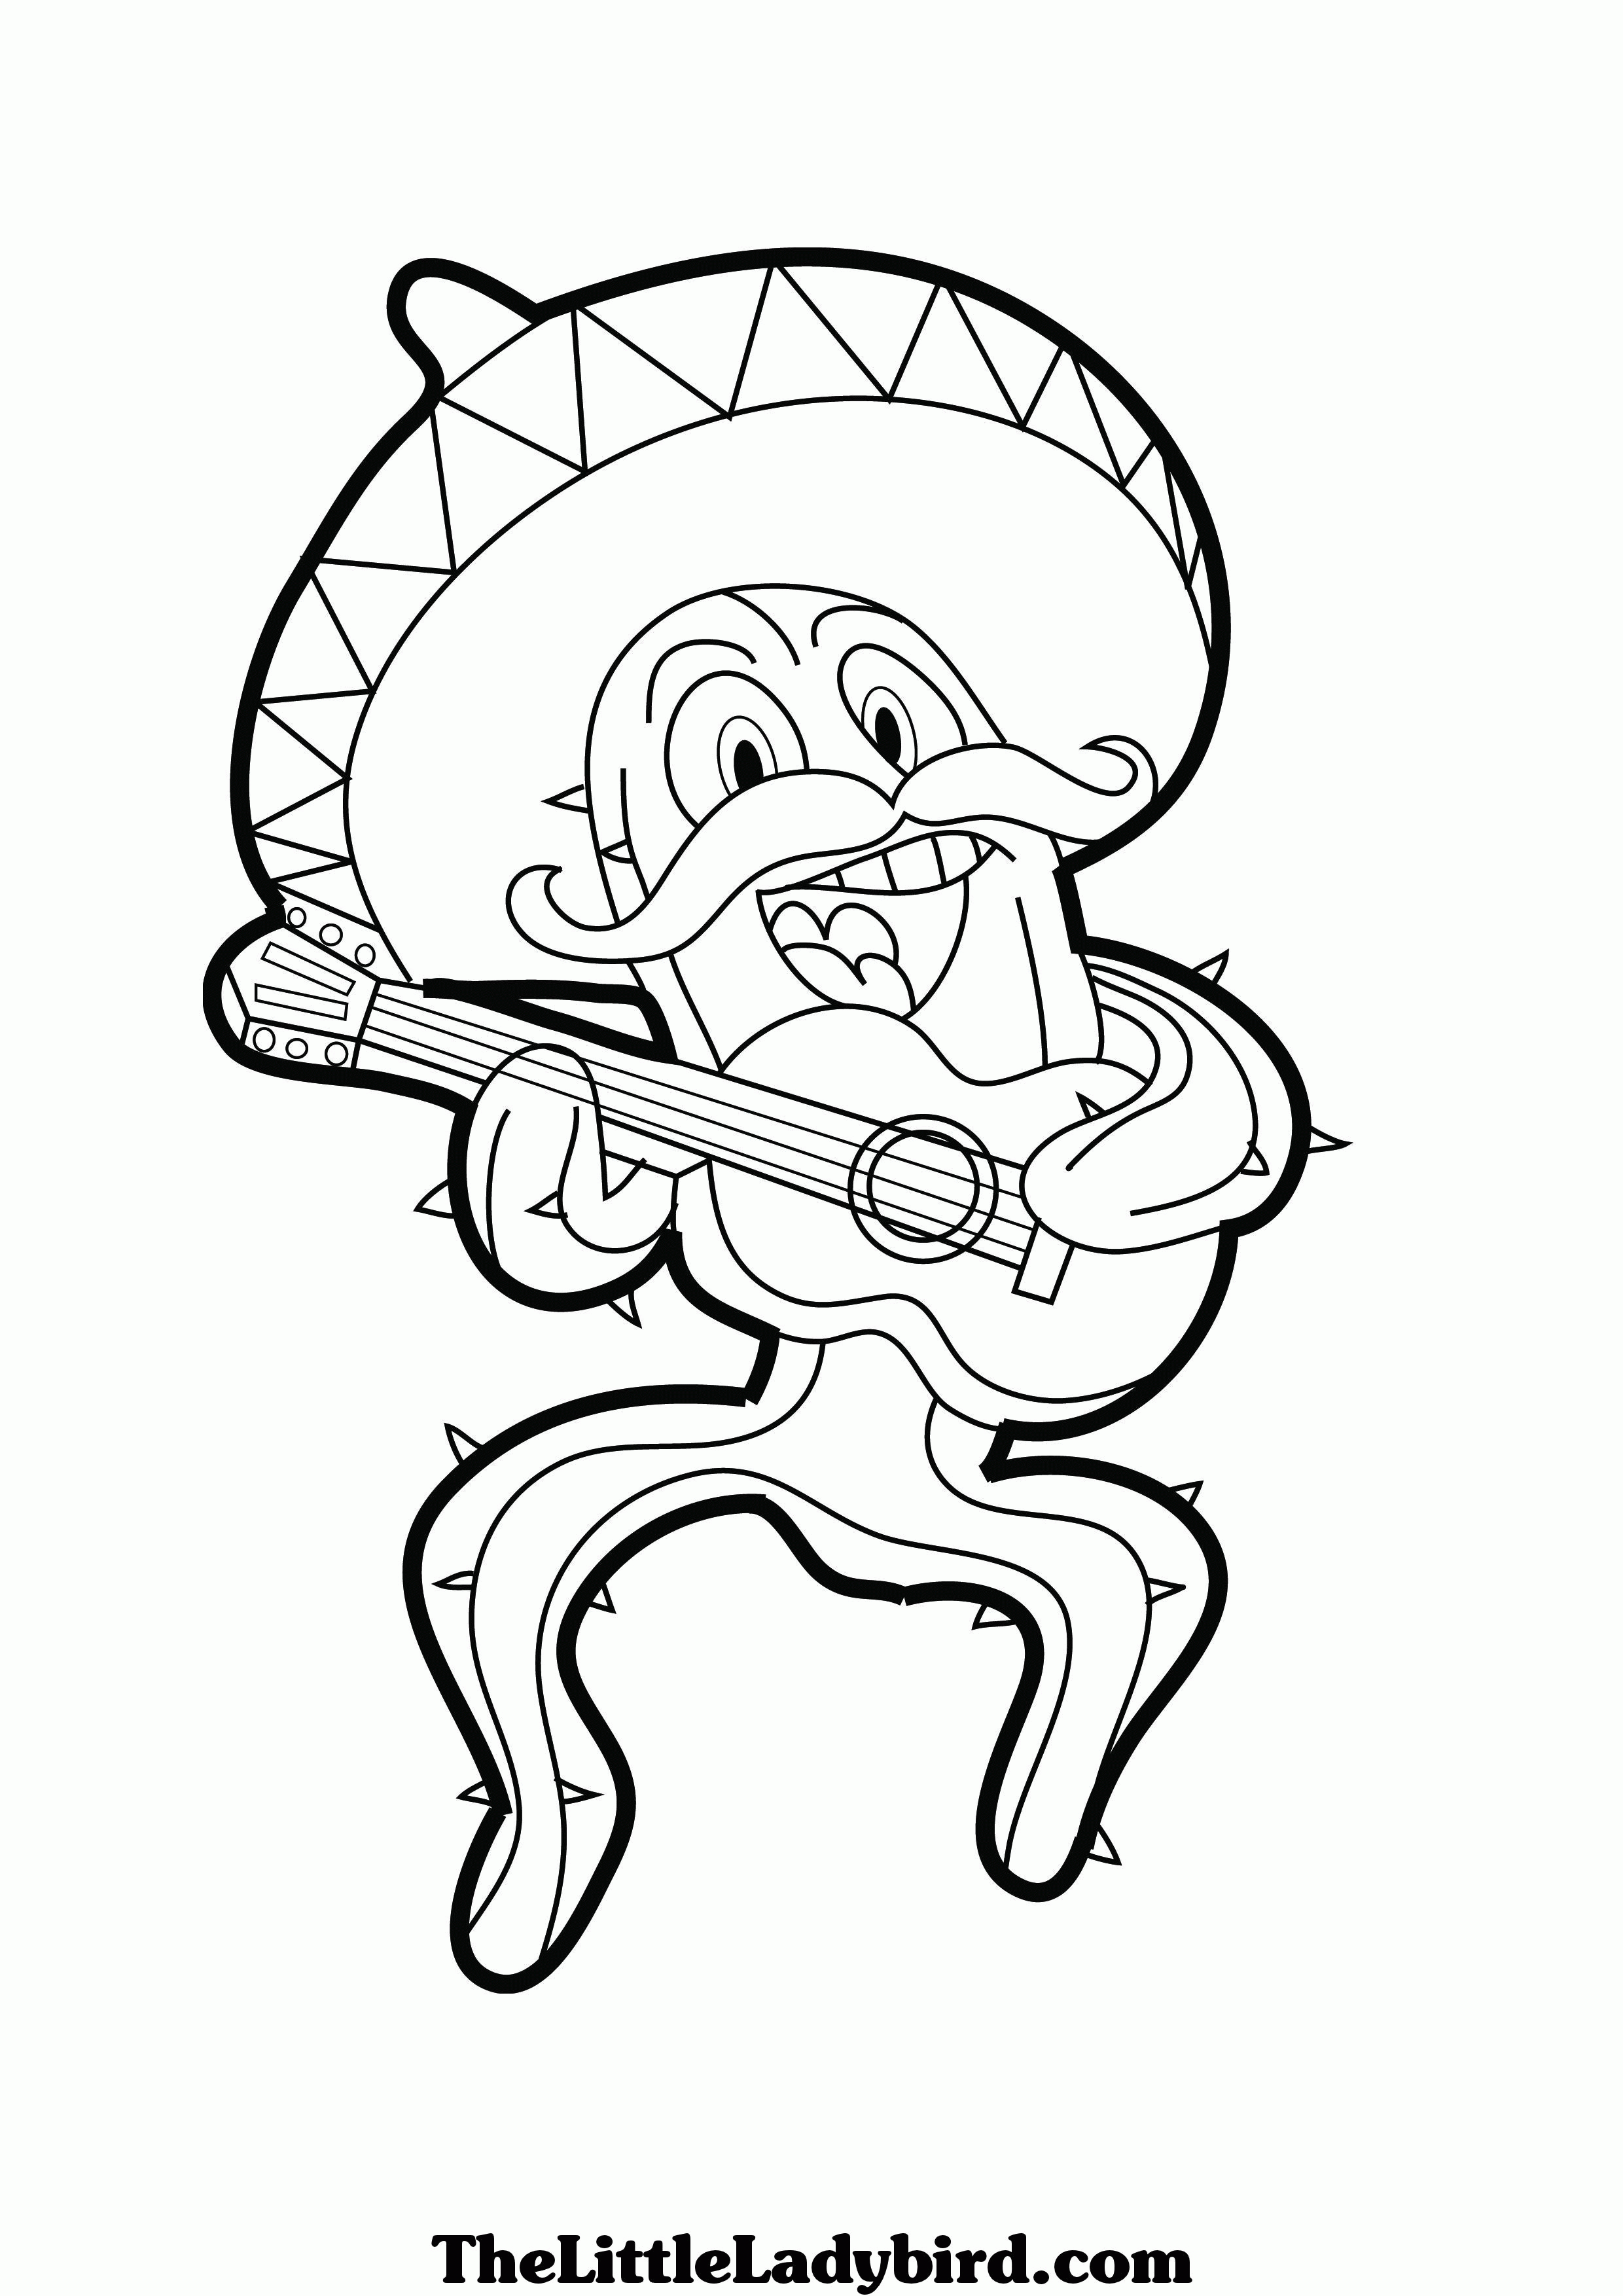 Preschool Christmas In Mexico Coloring Page Free Printable ...